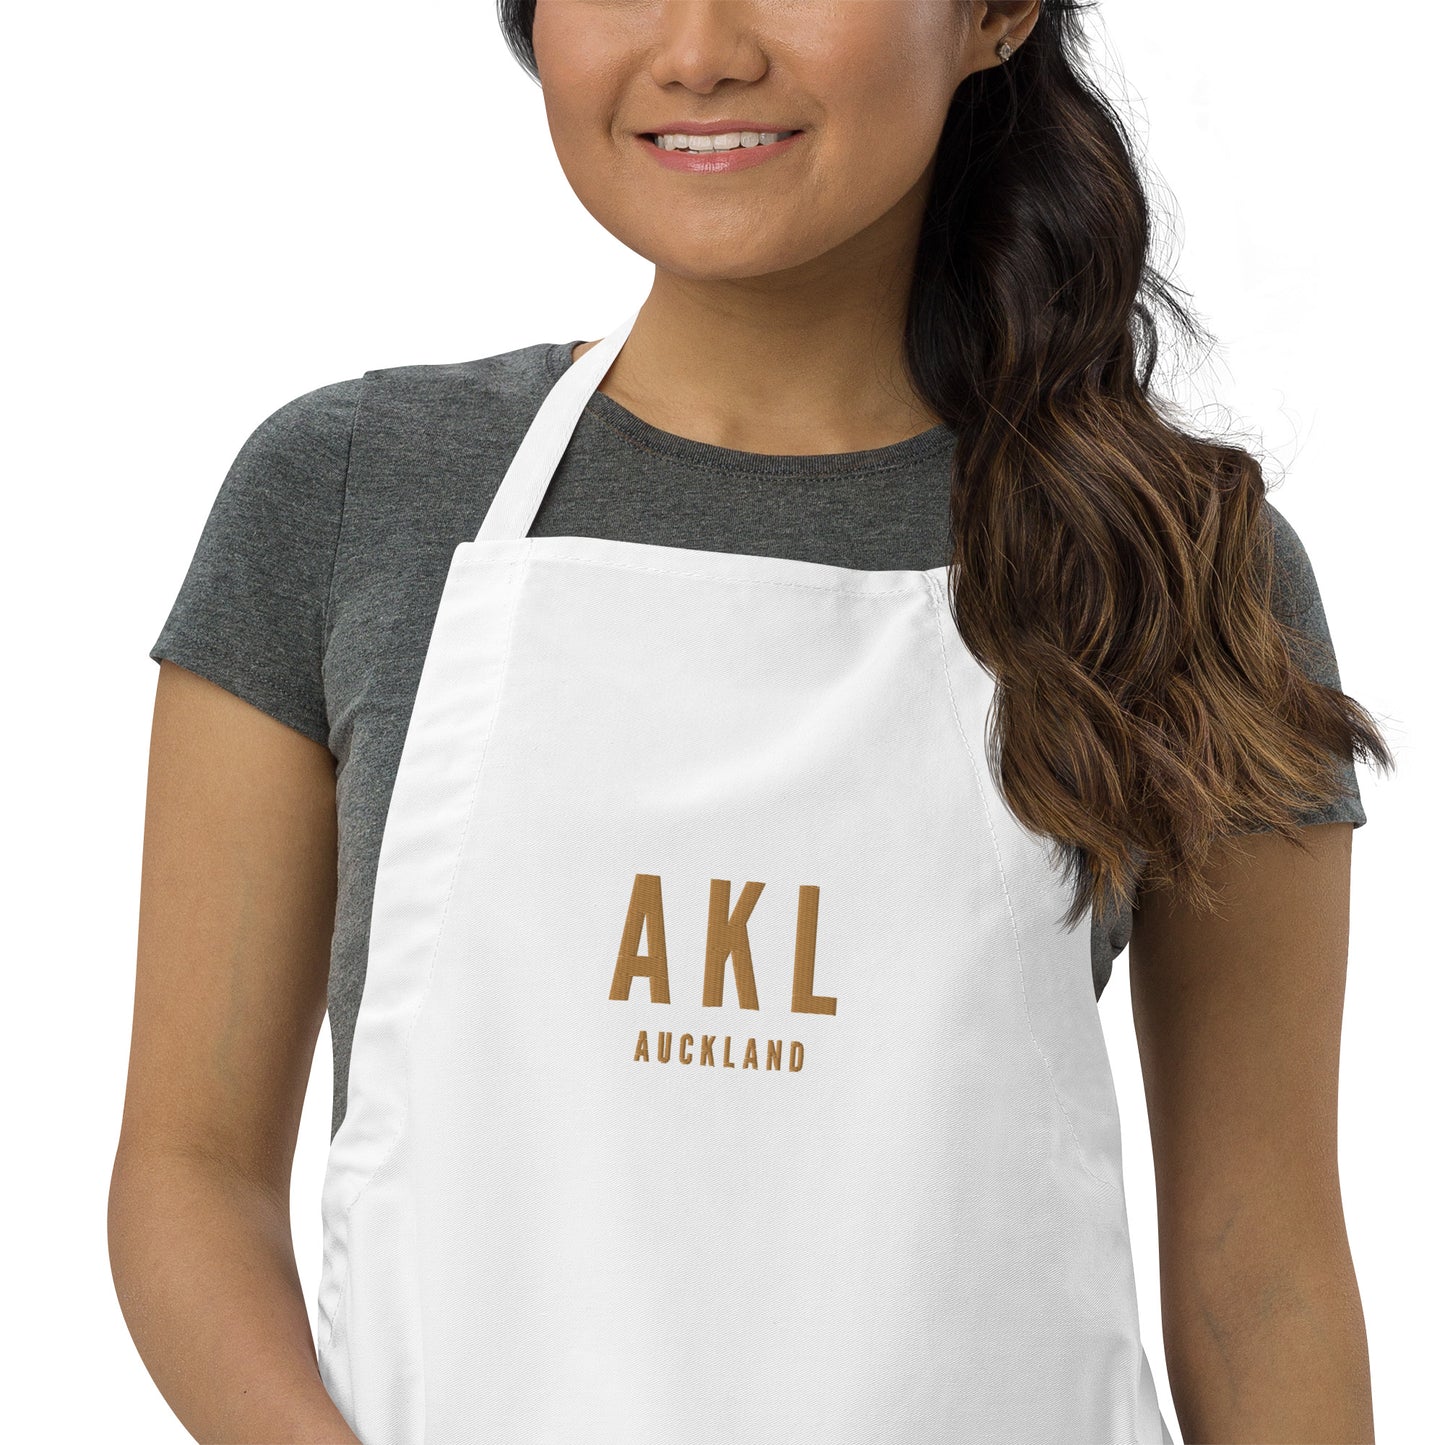 City Embroidered Apron - Old Gold • AKL Auckland • YHM Designs - Image 08